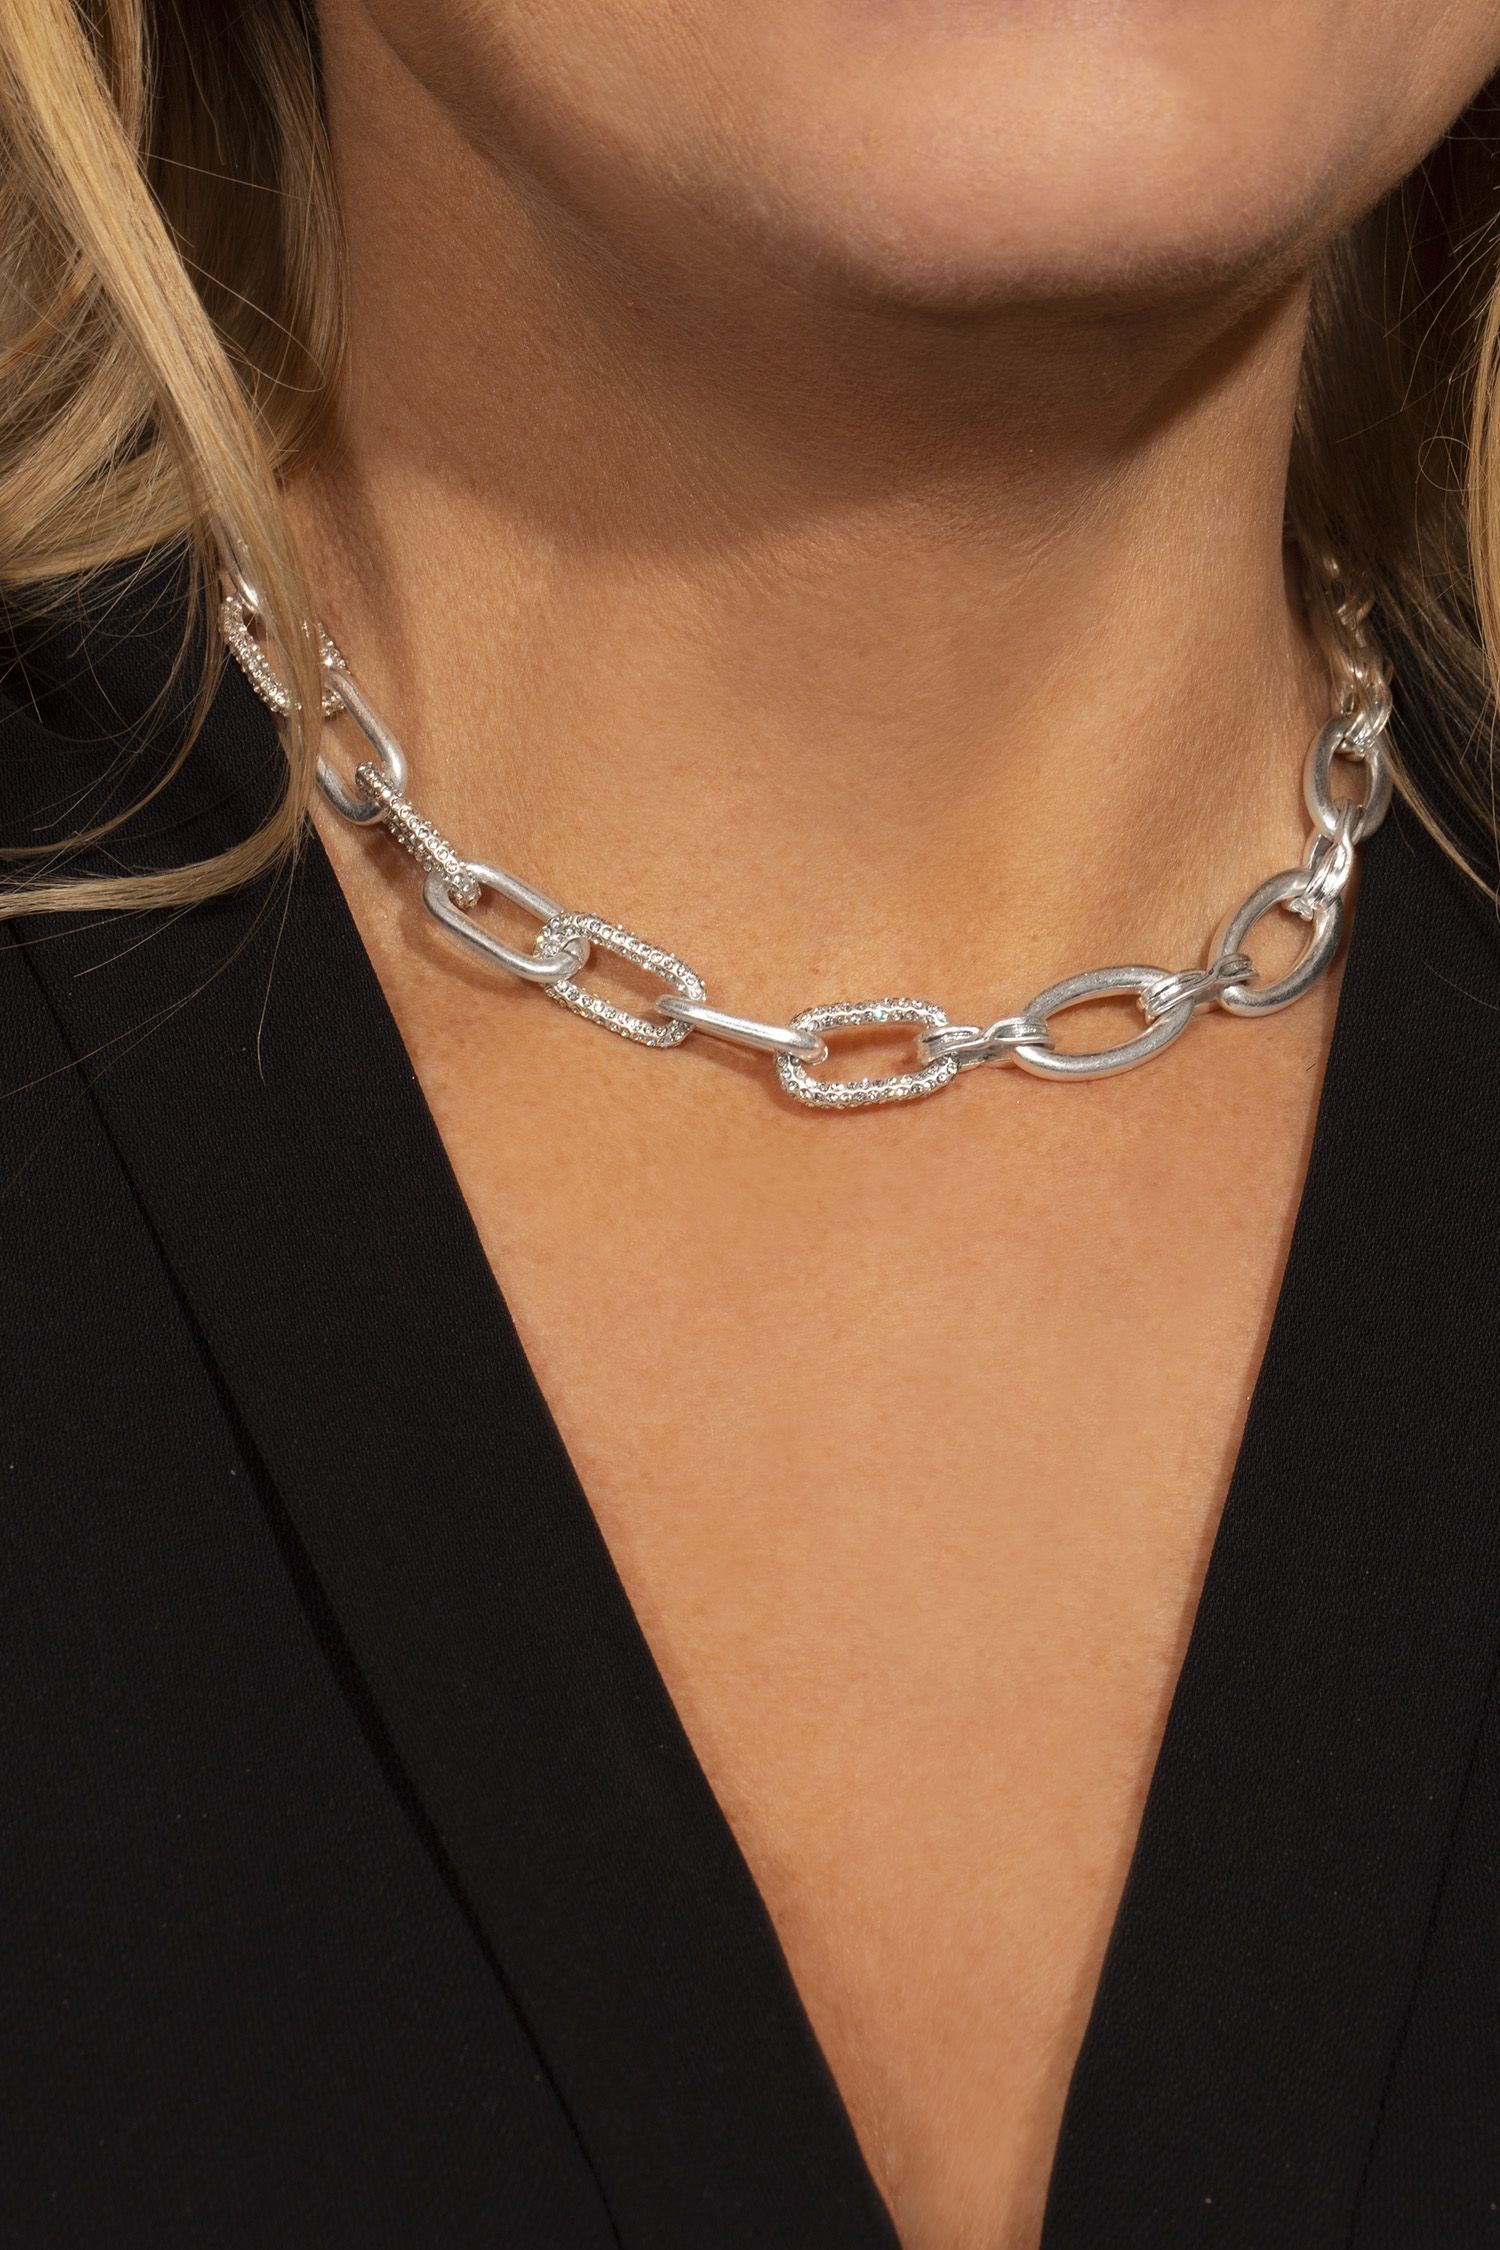 Simple and stunning, this silver chunky necklace features subtle sparkle with pave encrusted links on one half. Strong but delicate, it's such an on trend look right now and perfect for the winter months when we need our jewellery to really shine through. The 16 inch silver plated chain features a lobster clasp fastening and 3 inch extender so you can adjust it for your look. It also comes with the most perfect matching bracelet! When it doubt, go simple and style it out.